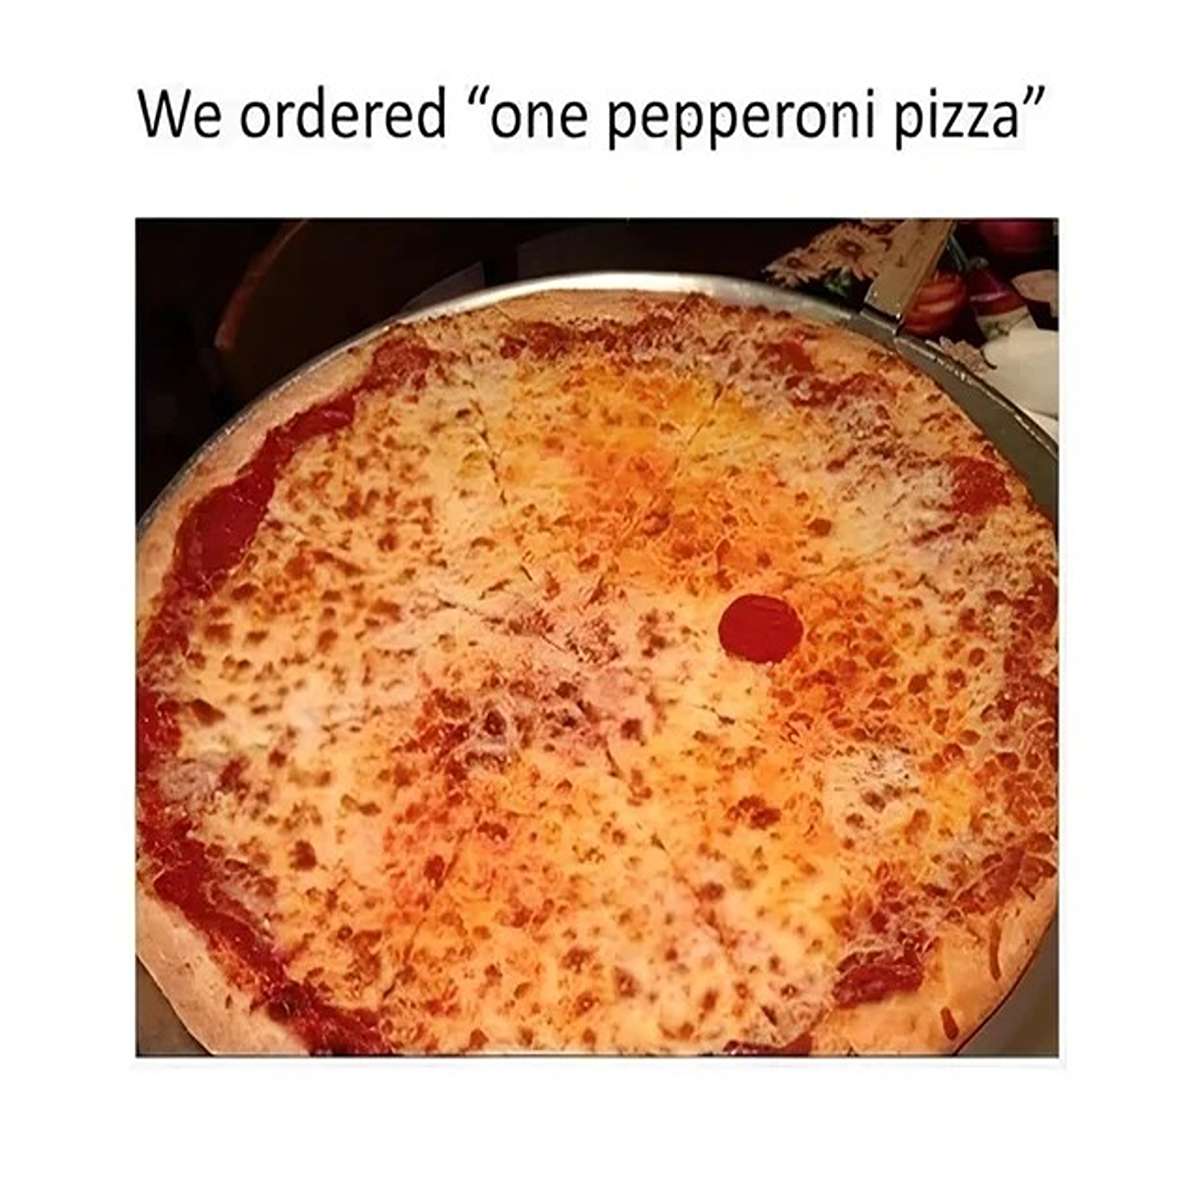 dank memes - pizza cheese - We ordered "one pepperoni pizza"